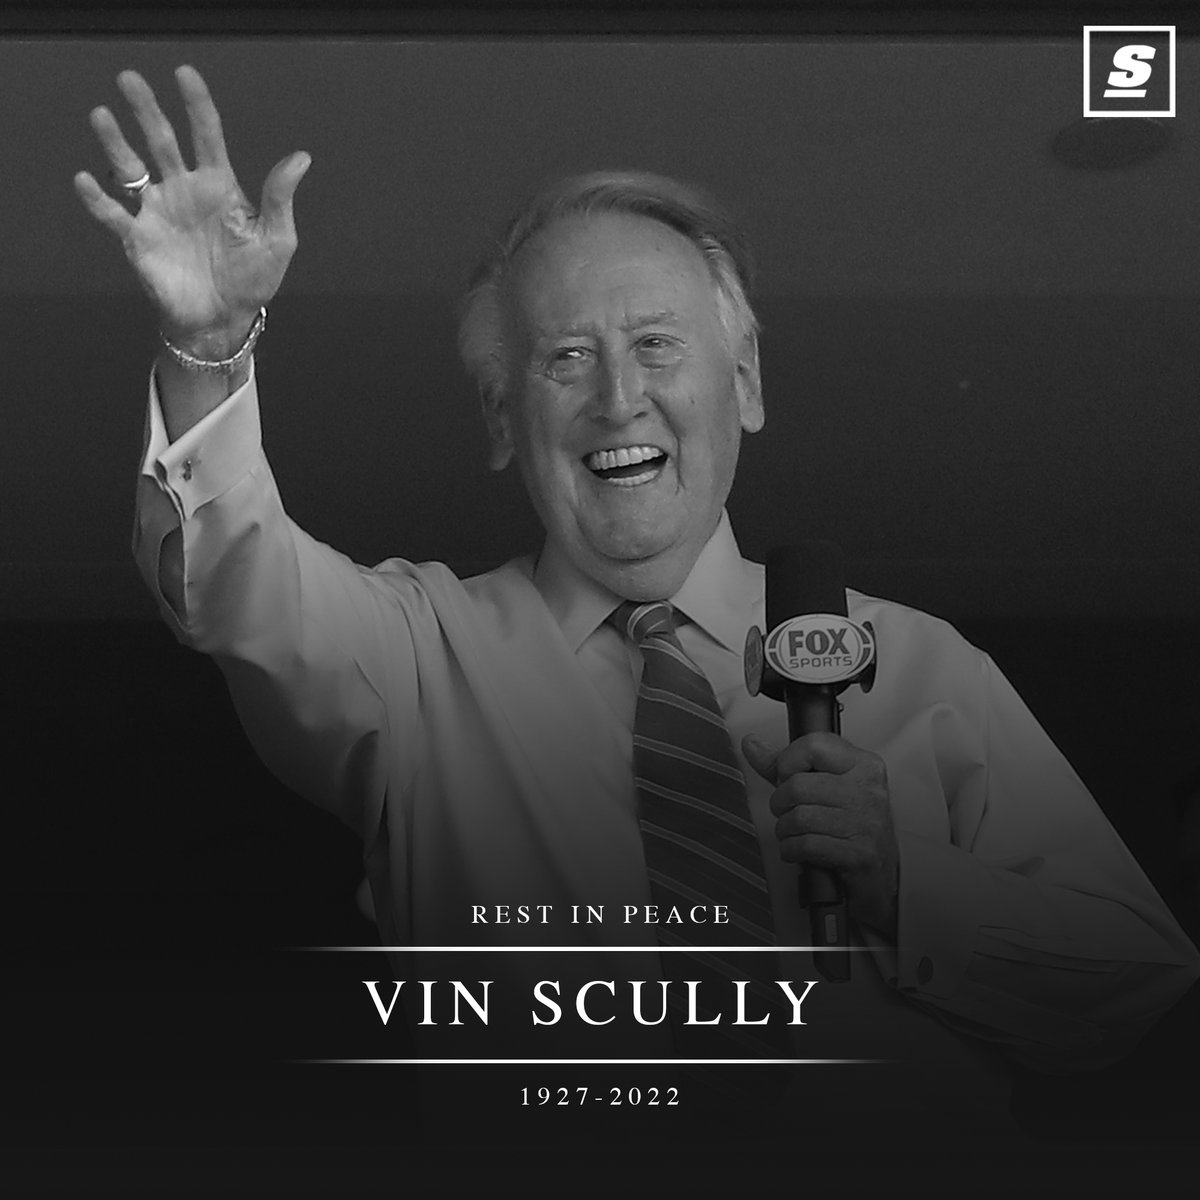 Legendary Dodgers' broadcaster Vin Scully has passed away at the age of 94.